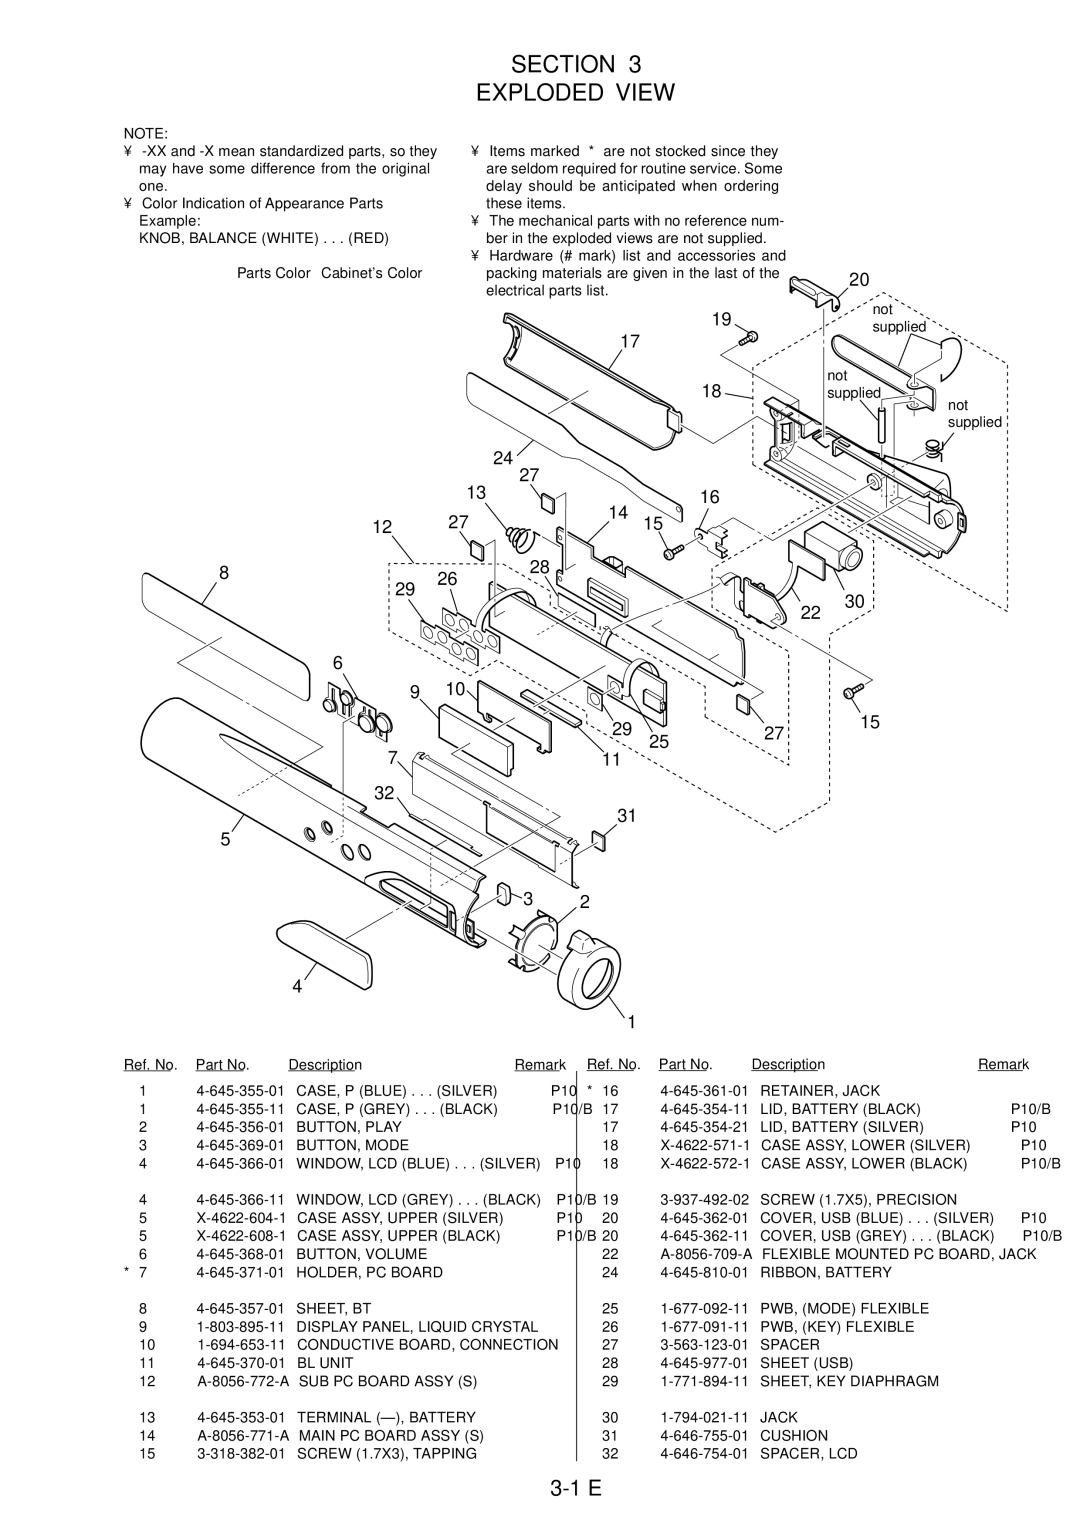 Sony MC-P10/B service manual Section Exploded View 